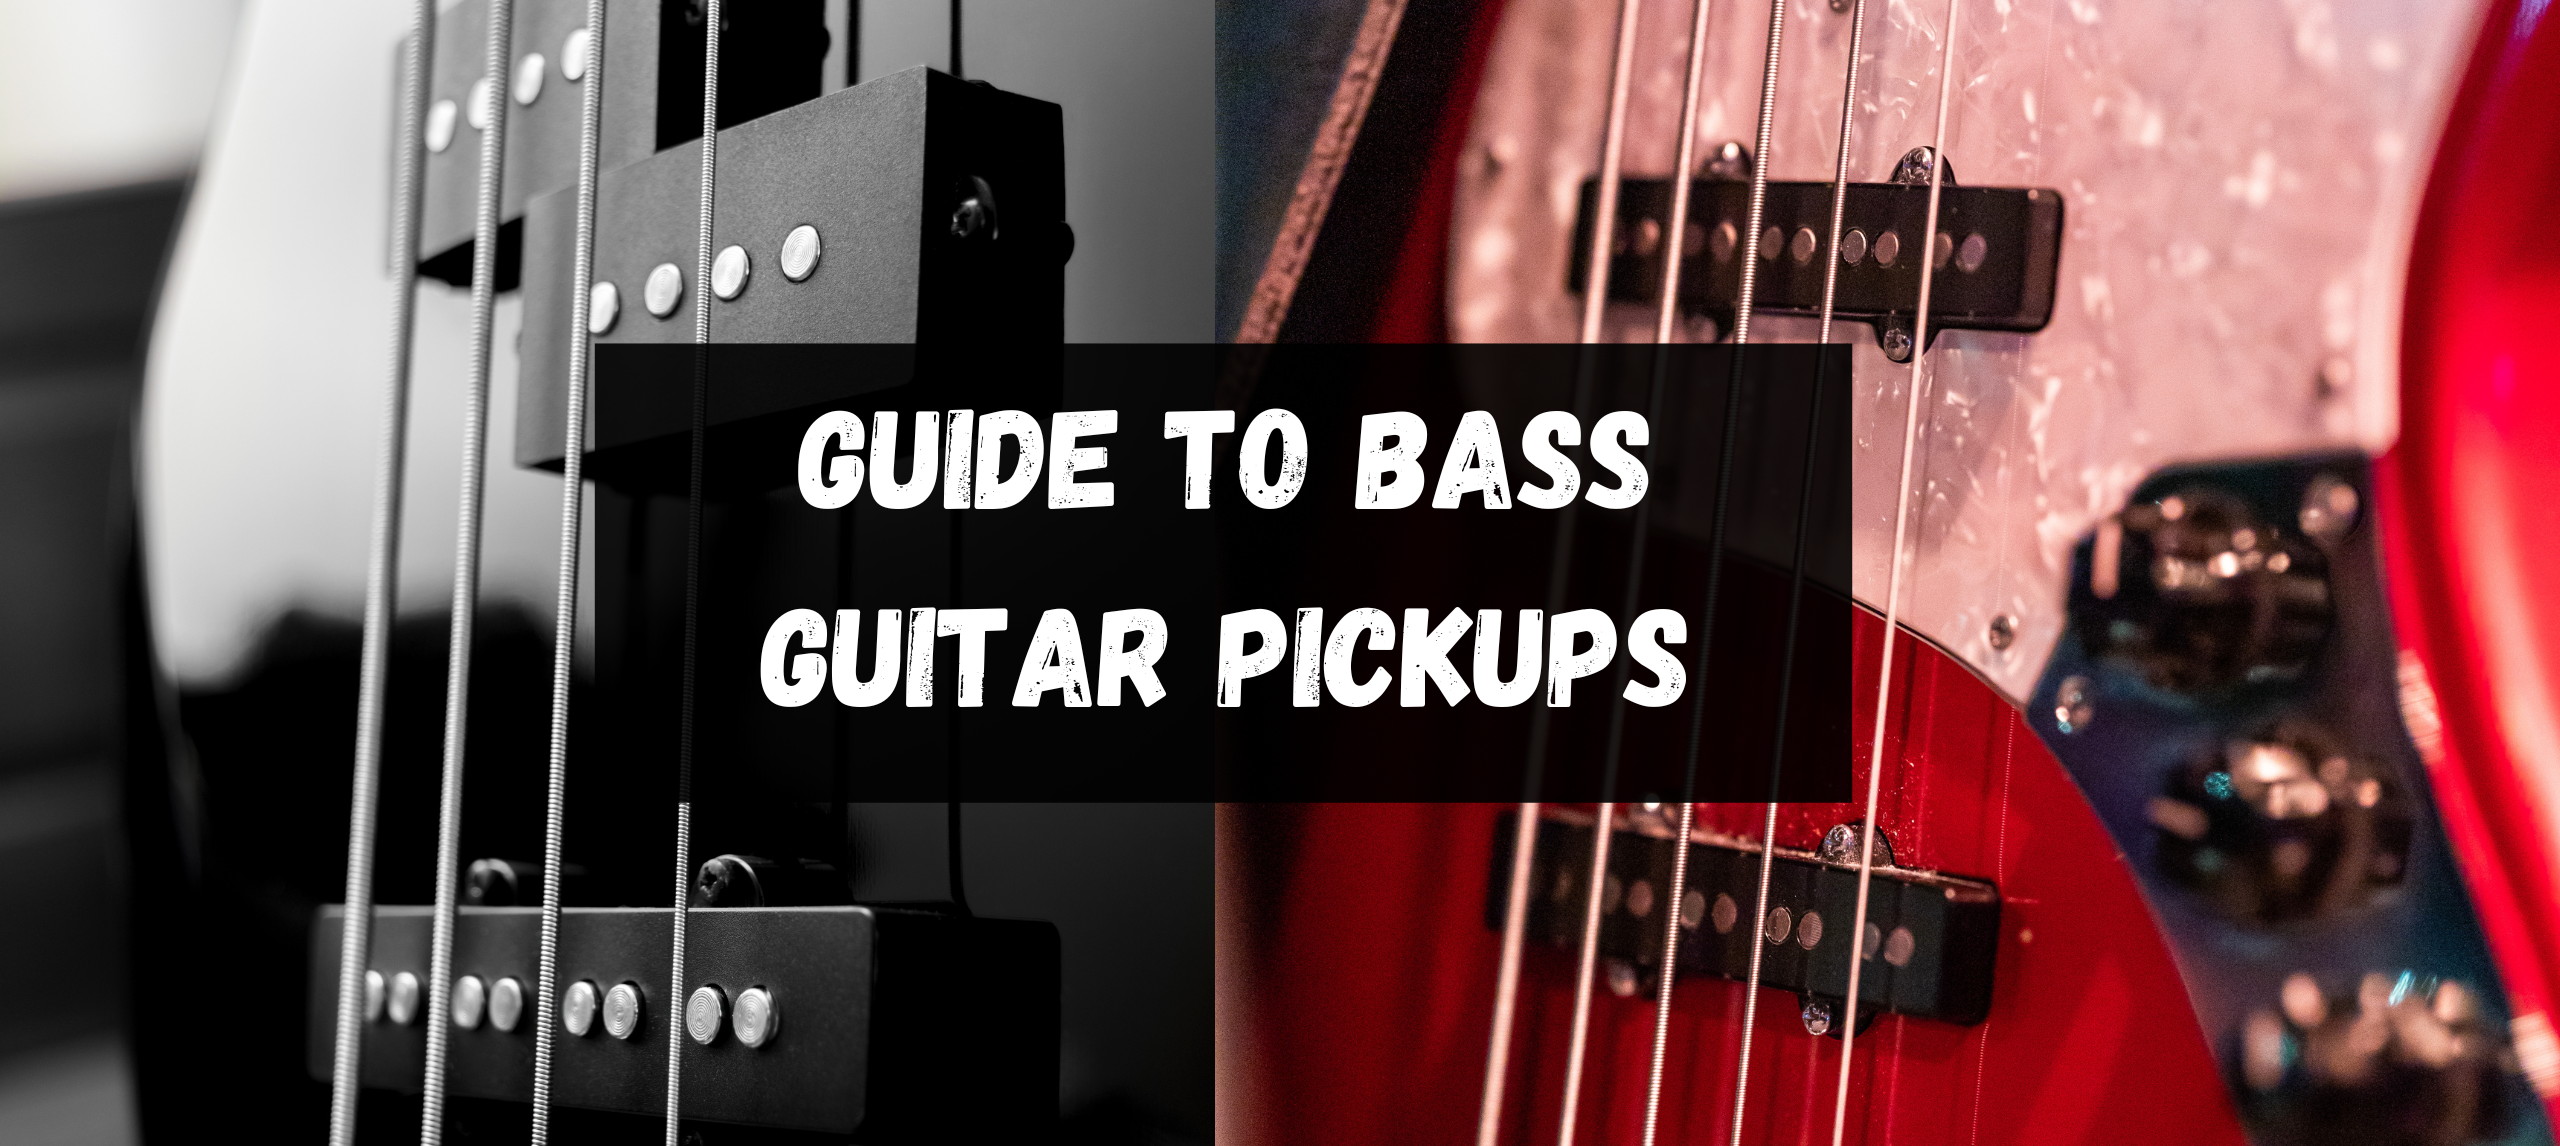 guide-to-bass-guitar-pickups